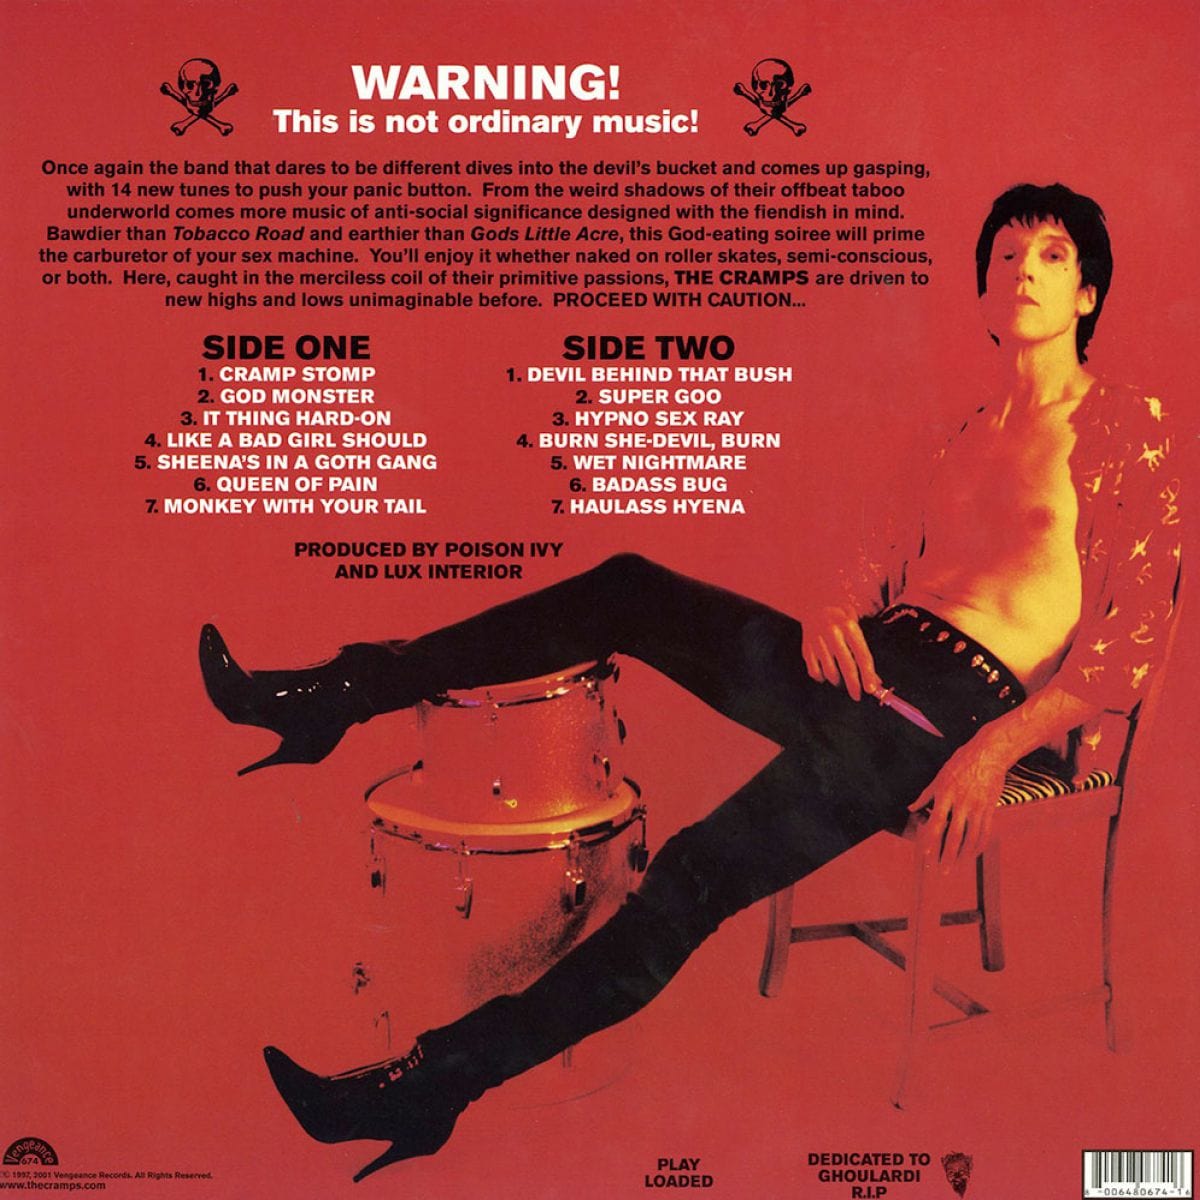 THE CRAMPS: Big Beat From Badsville (180g) (Colored vinyl) LP